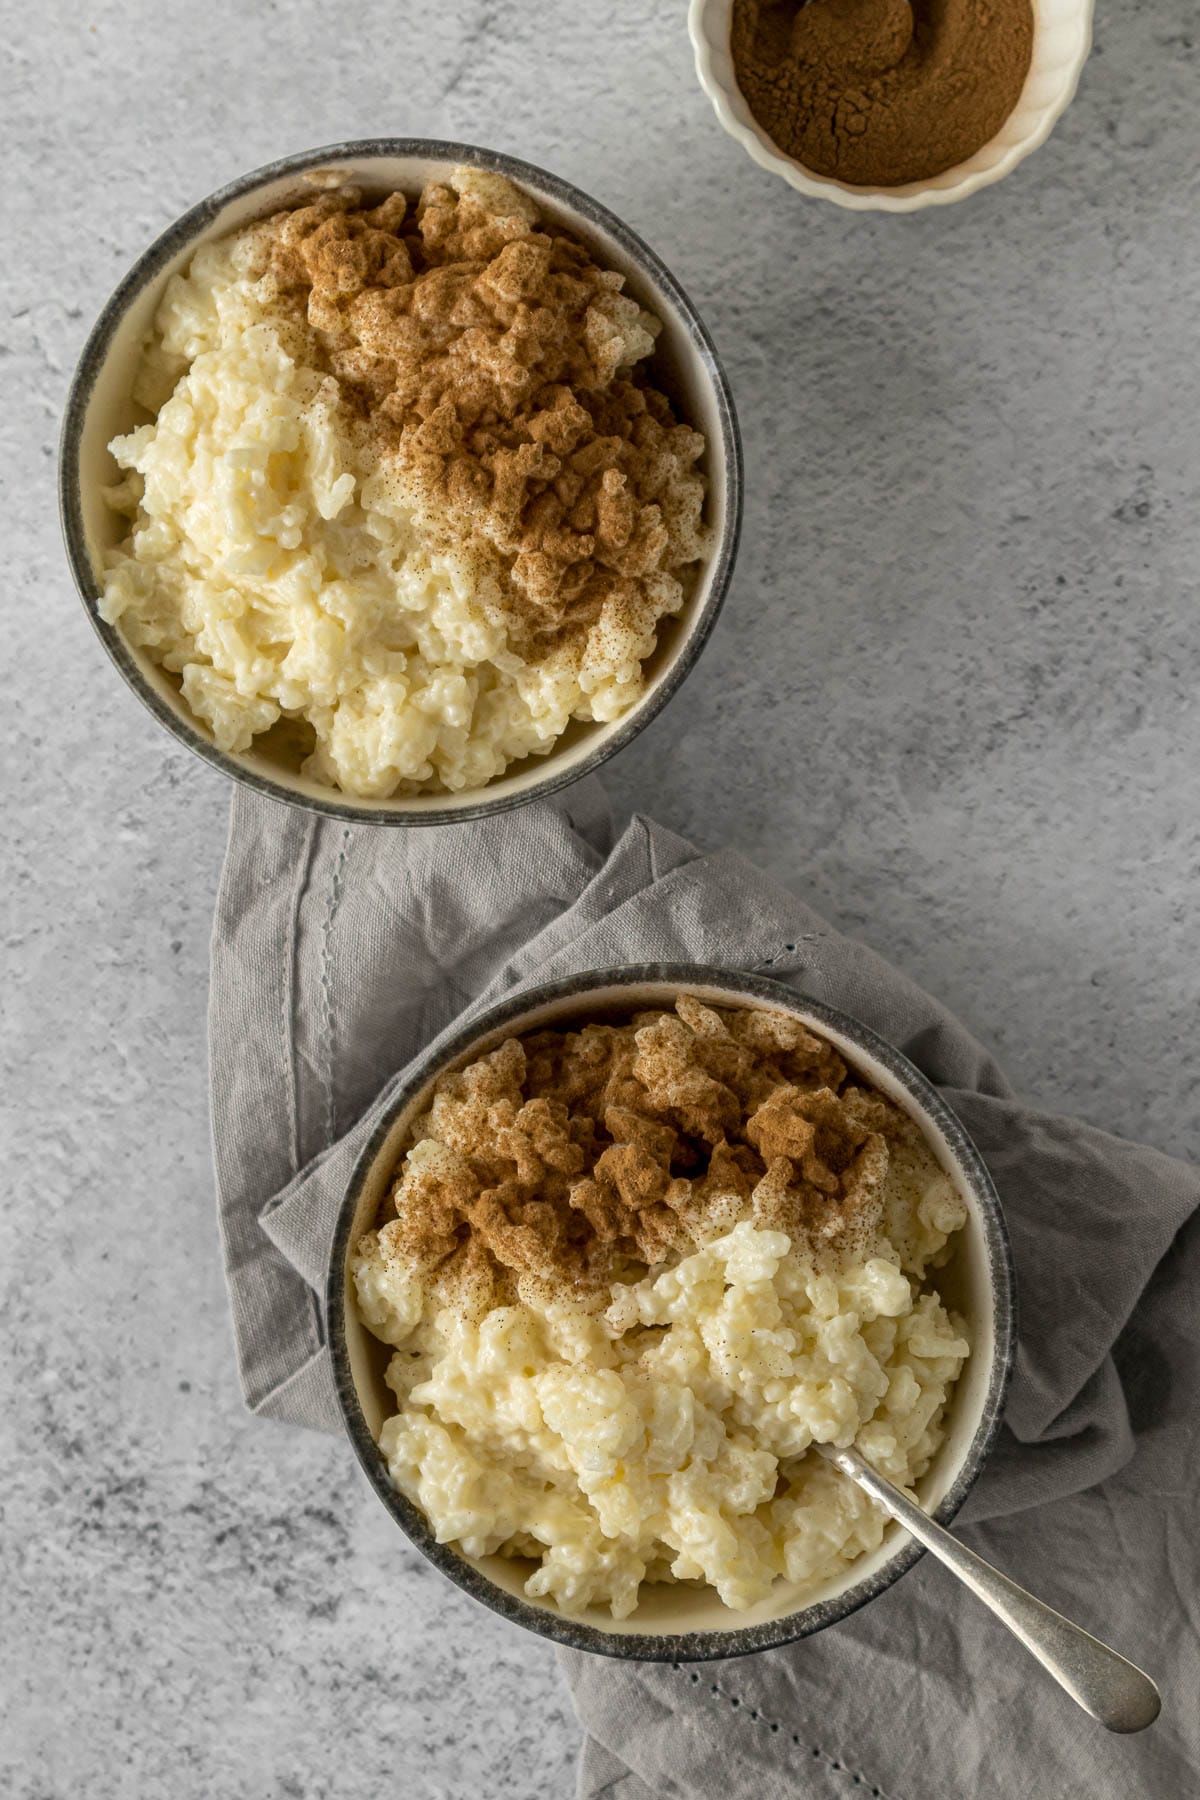 Bowls of rice pudding with sprinkle of cinnamon.